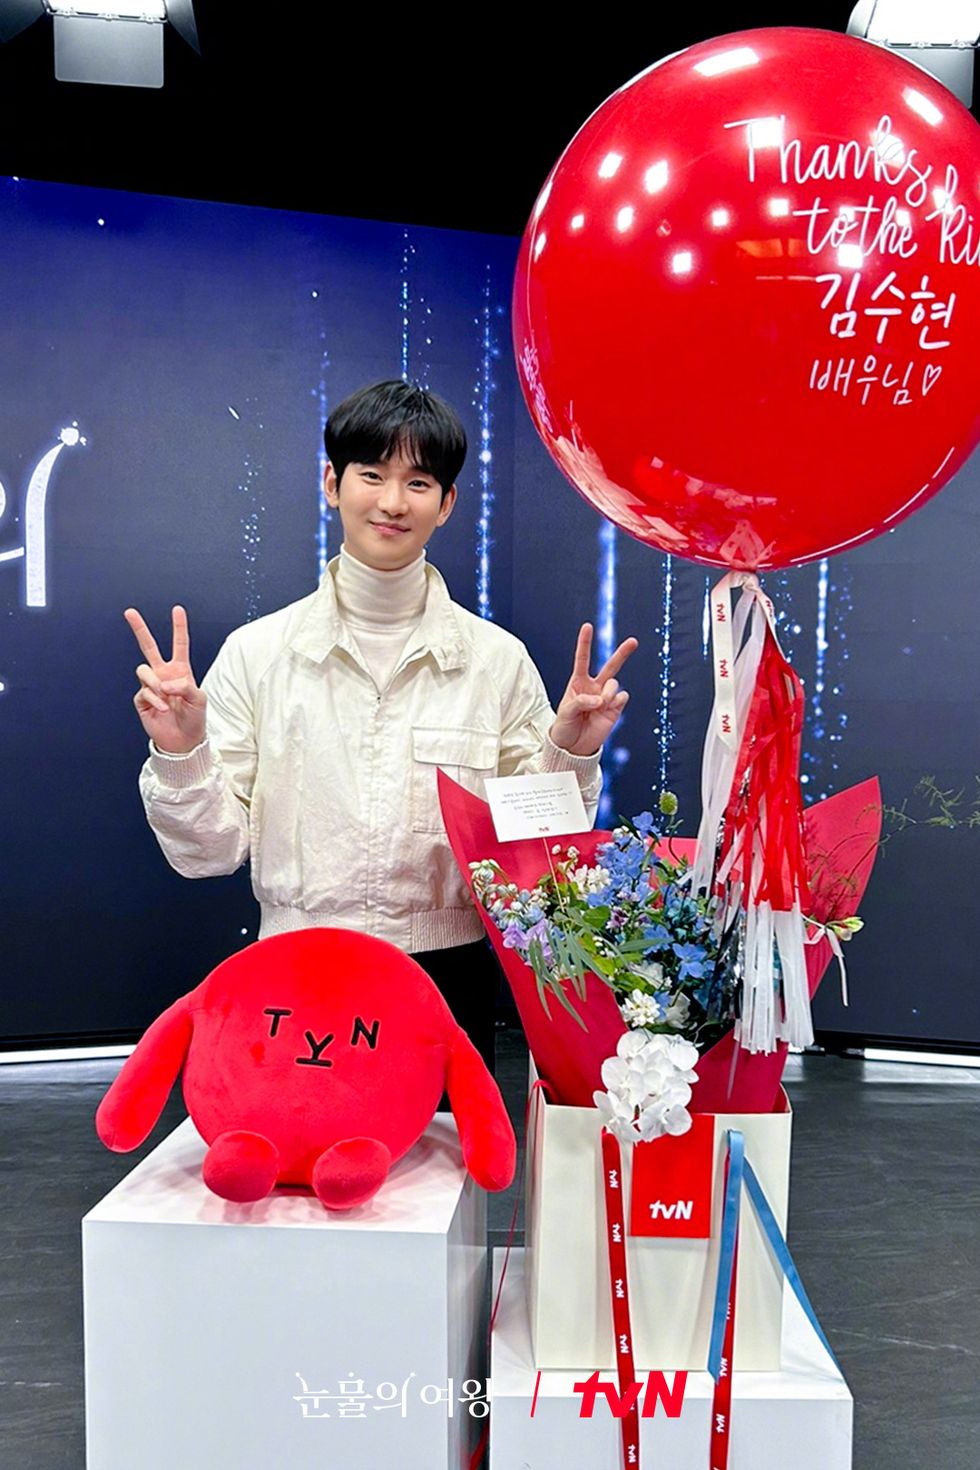 a person standing behind a podium with a red balloon and a red heart